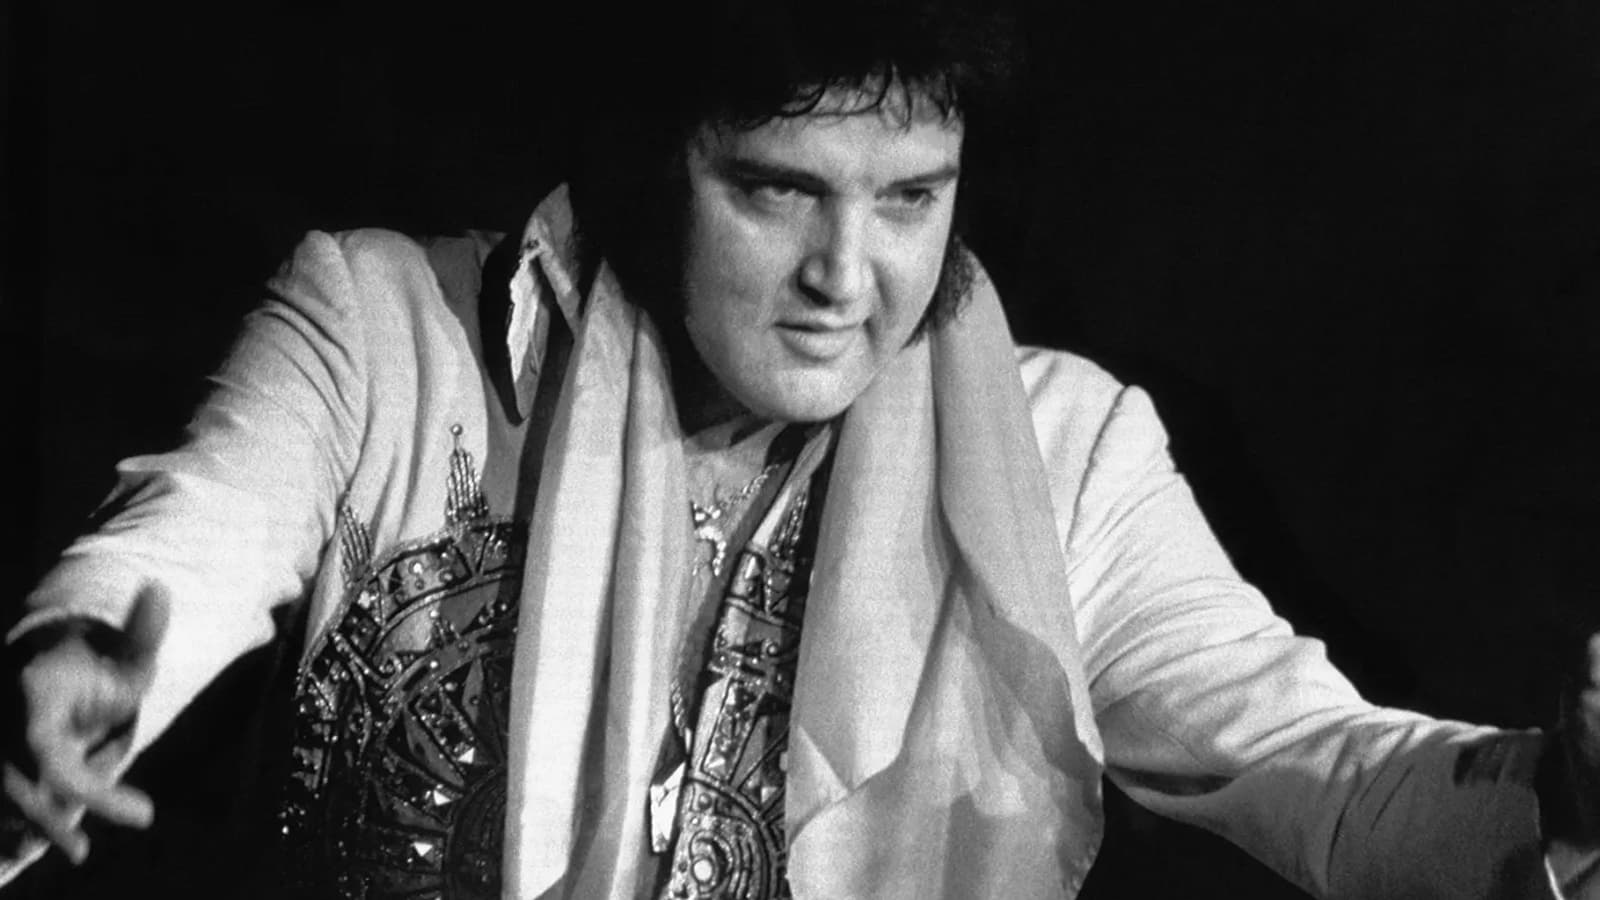 Elvis Presley Biography: Age, Height, Birthday, Music Career, Family, Personal Life, Net Worth